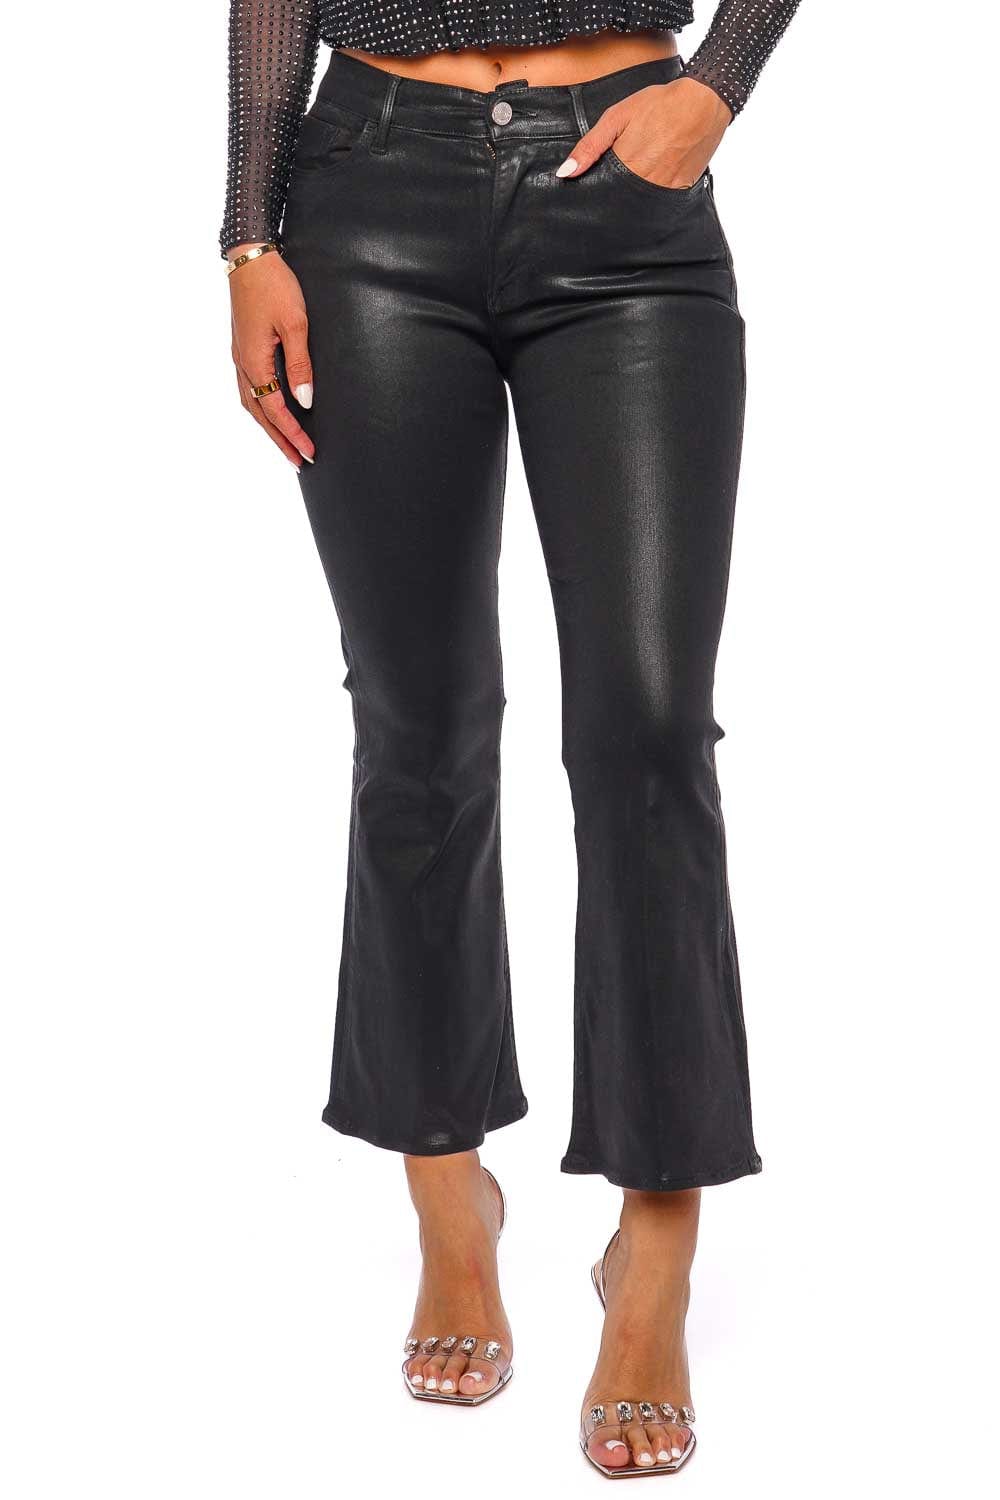 Le Fashion: 25 Black Cropped Flare Jeans to Wear This Winter